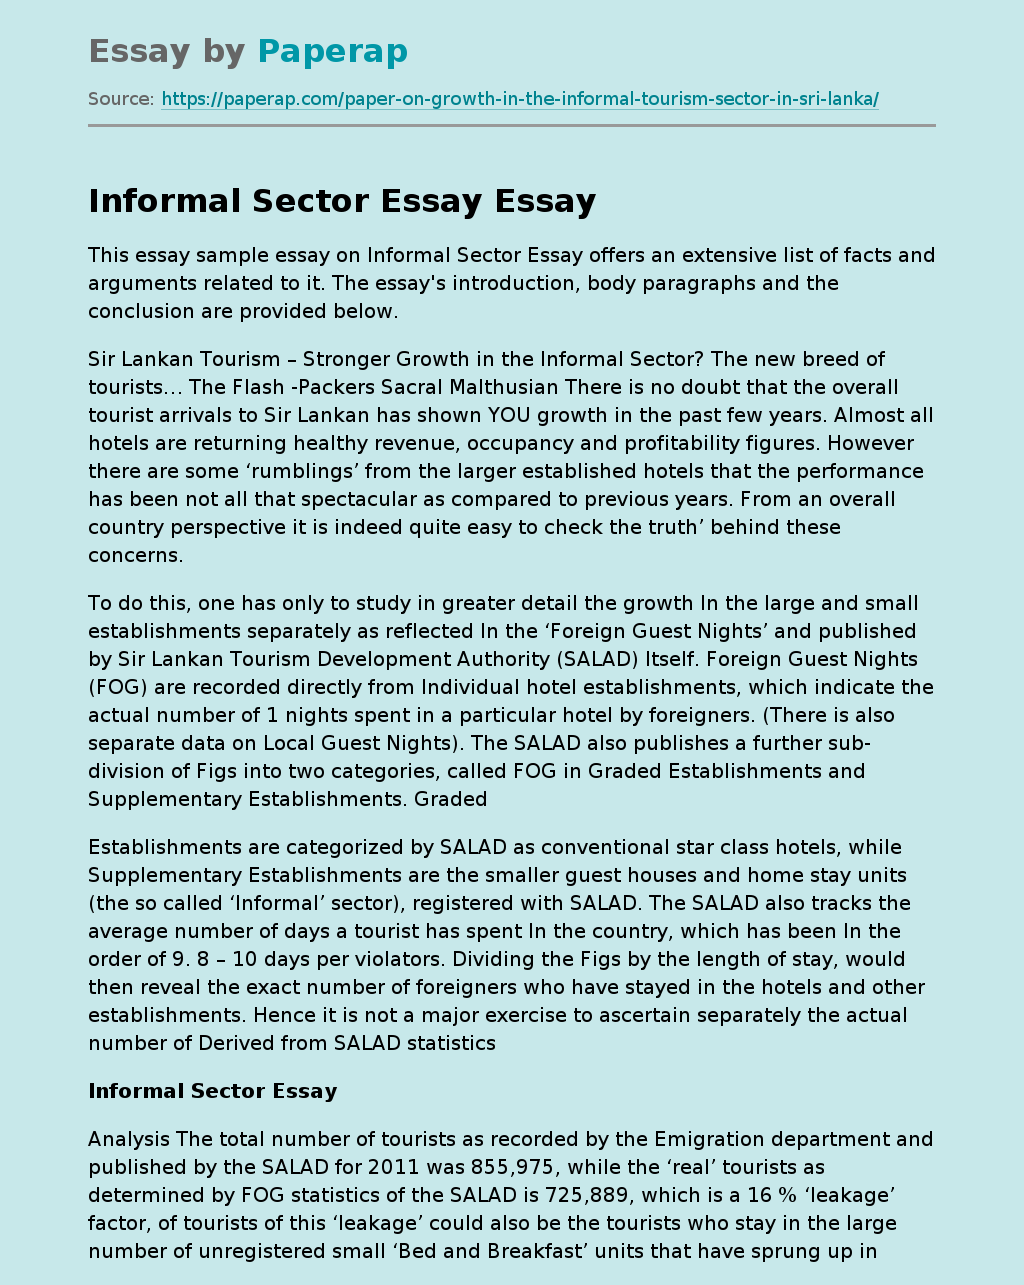 The Informal Sector and Its Characteristics